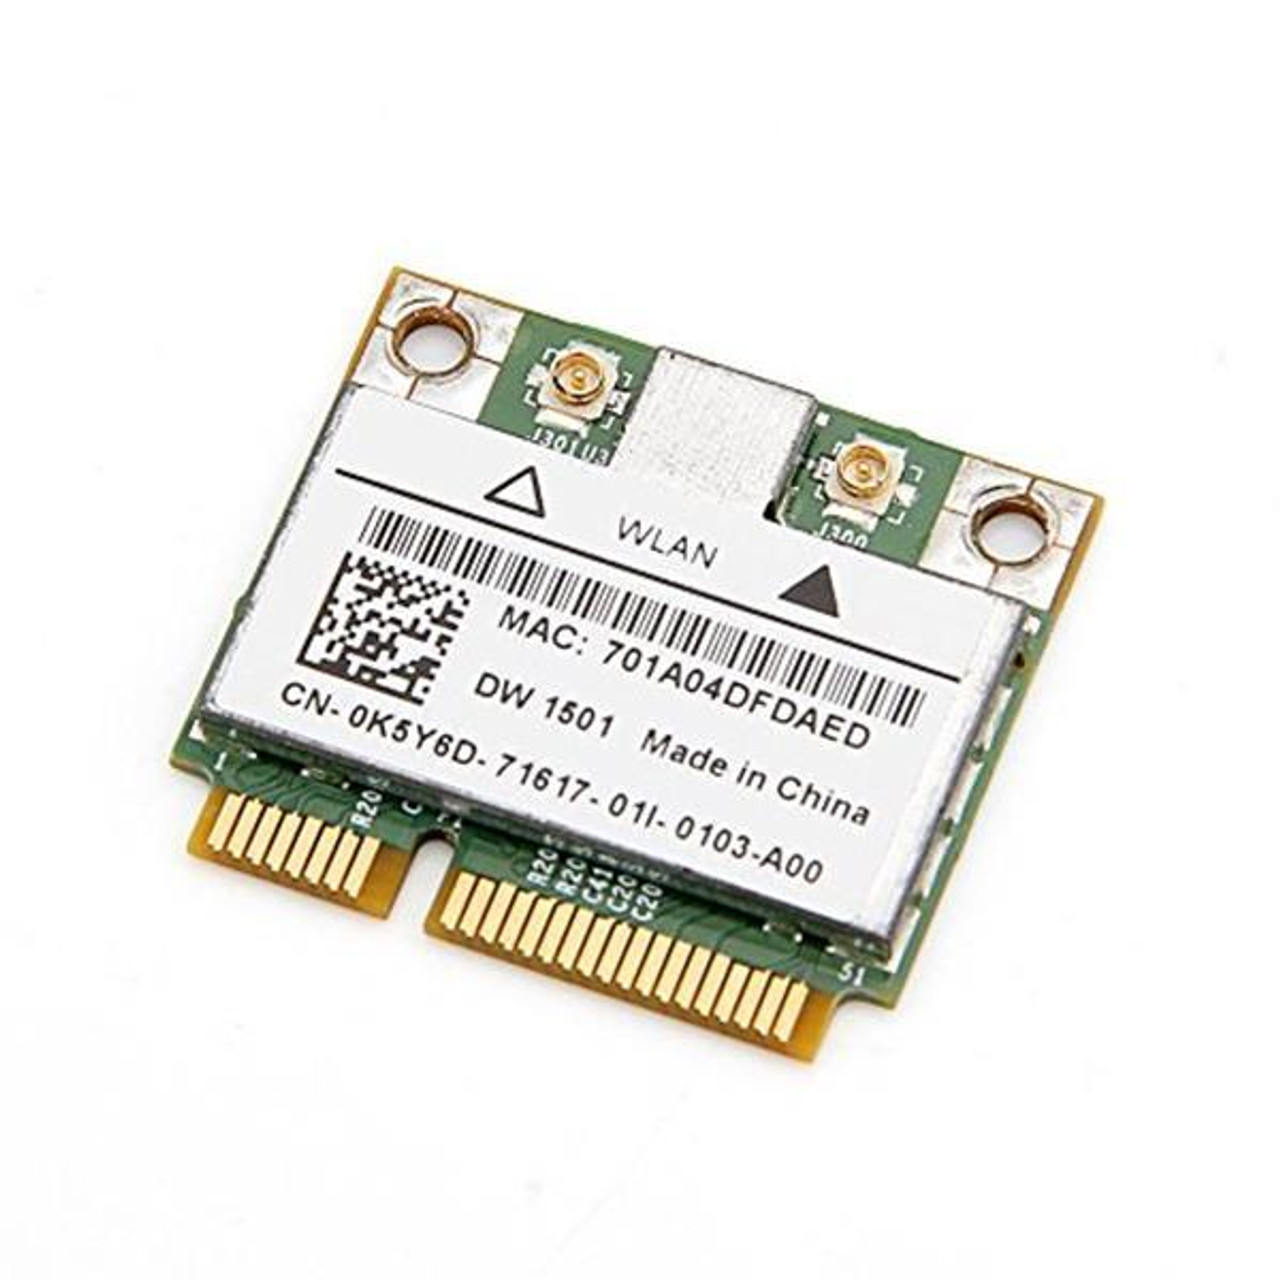 BCM94313HMG2LP1 Broadcom 2.4GHz 150Mbps IEEE 802.11a/b/g Mini PCI WLAN Wireless Network Card for HP Compatible